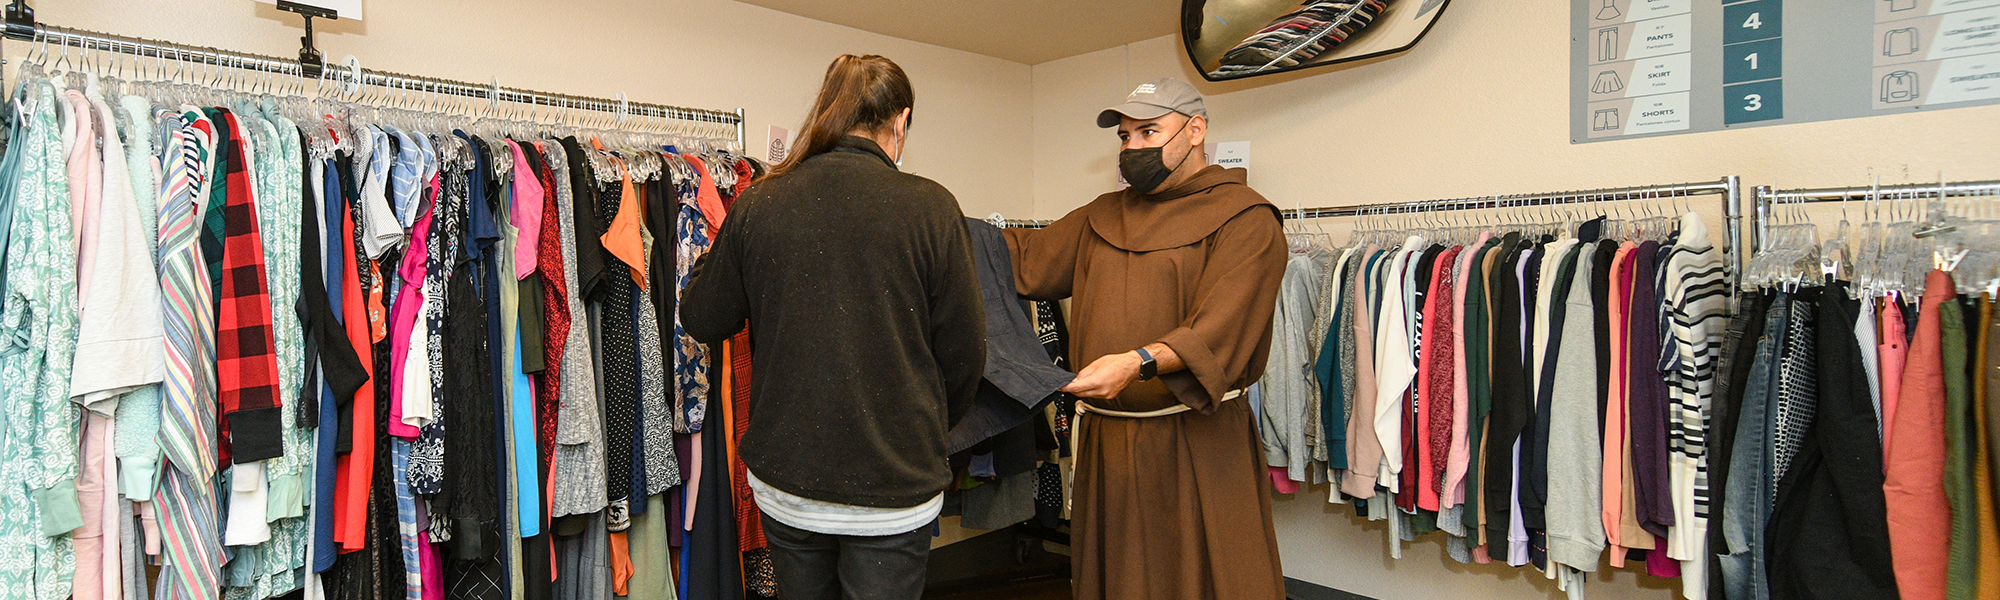 Shop for Clothes | St. Anthony's